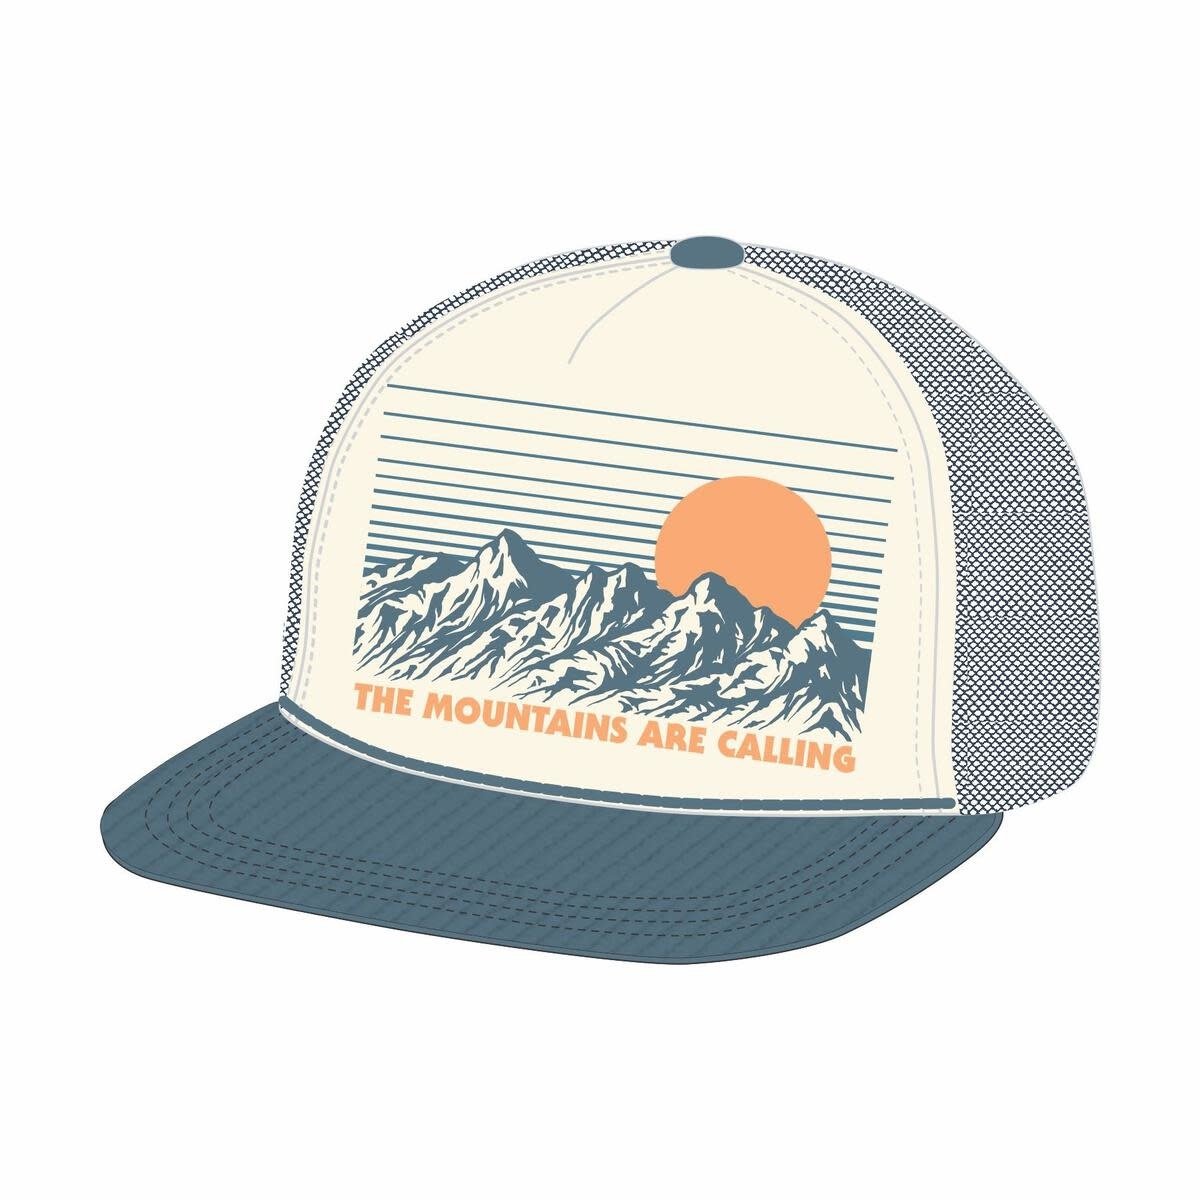 Tiny Whales Mountains Are Calling Trucker Hat - River Blue/Natural